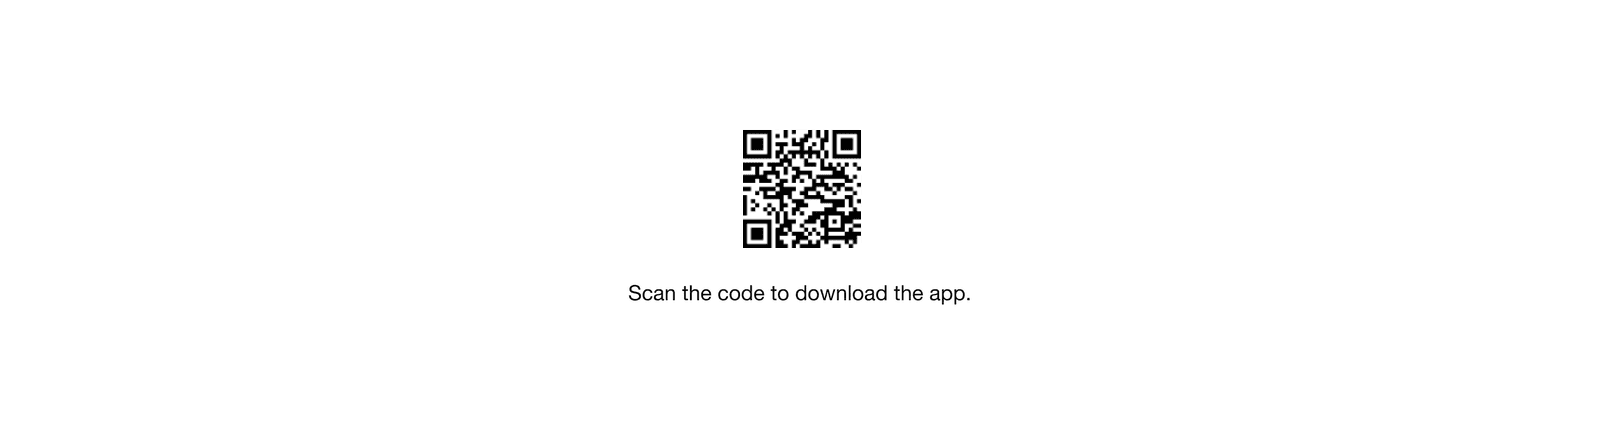 QR Code Reader Barcode Lookup on the App Store